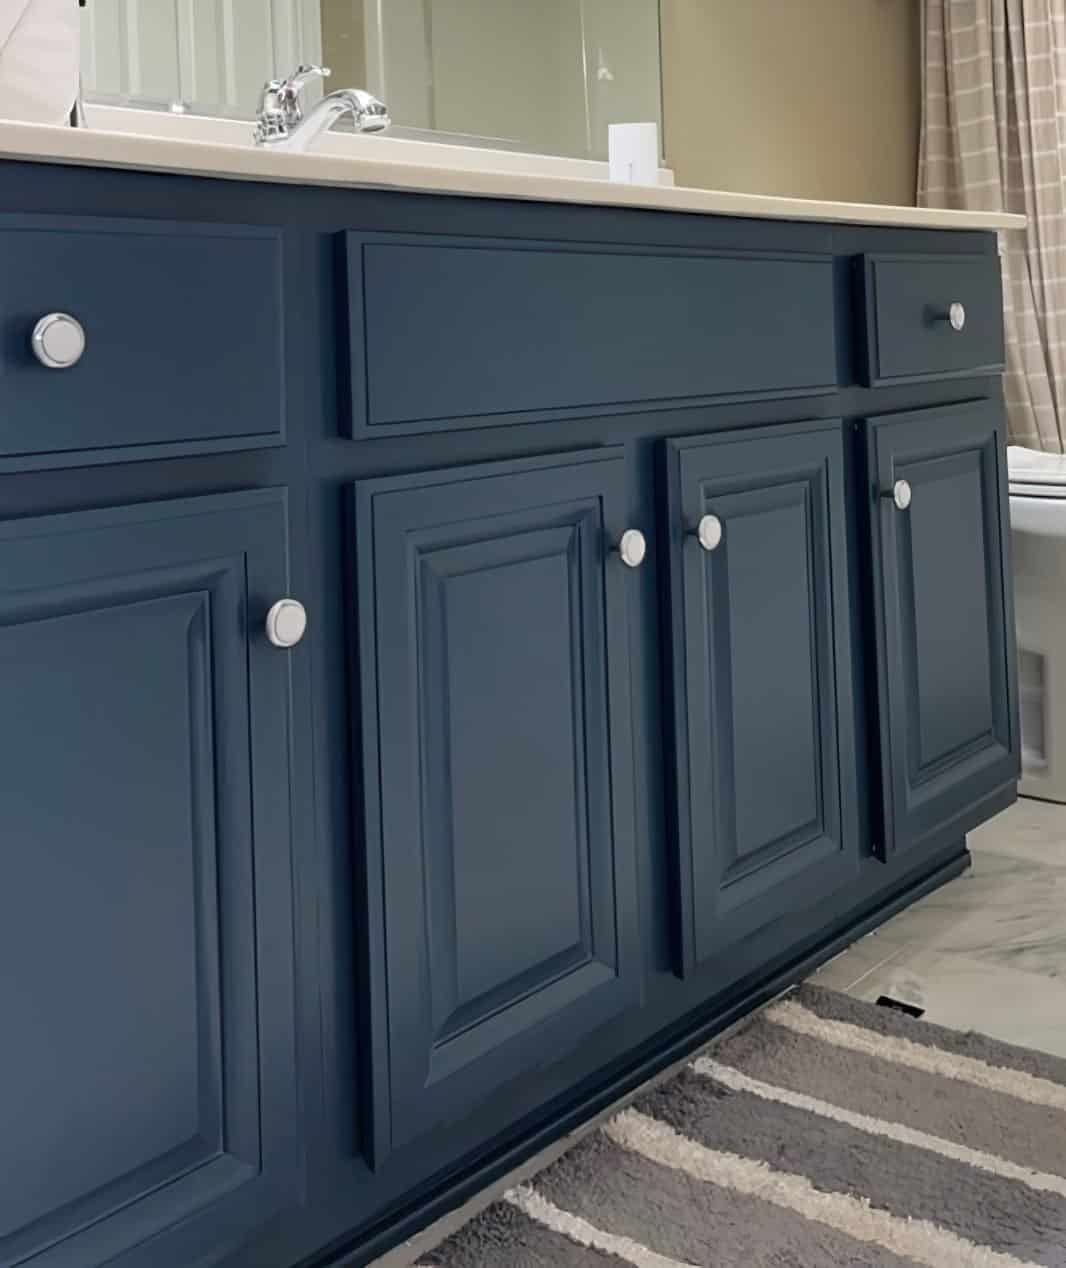 Transform your cabinets with expert cabinet painting by professional house painters in Virginia Beach.